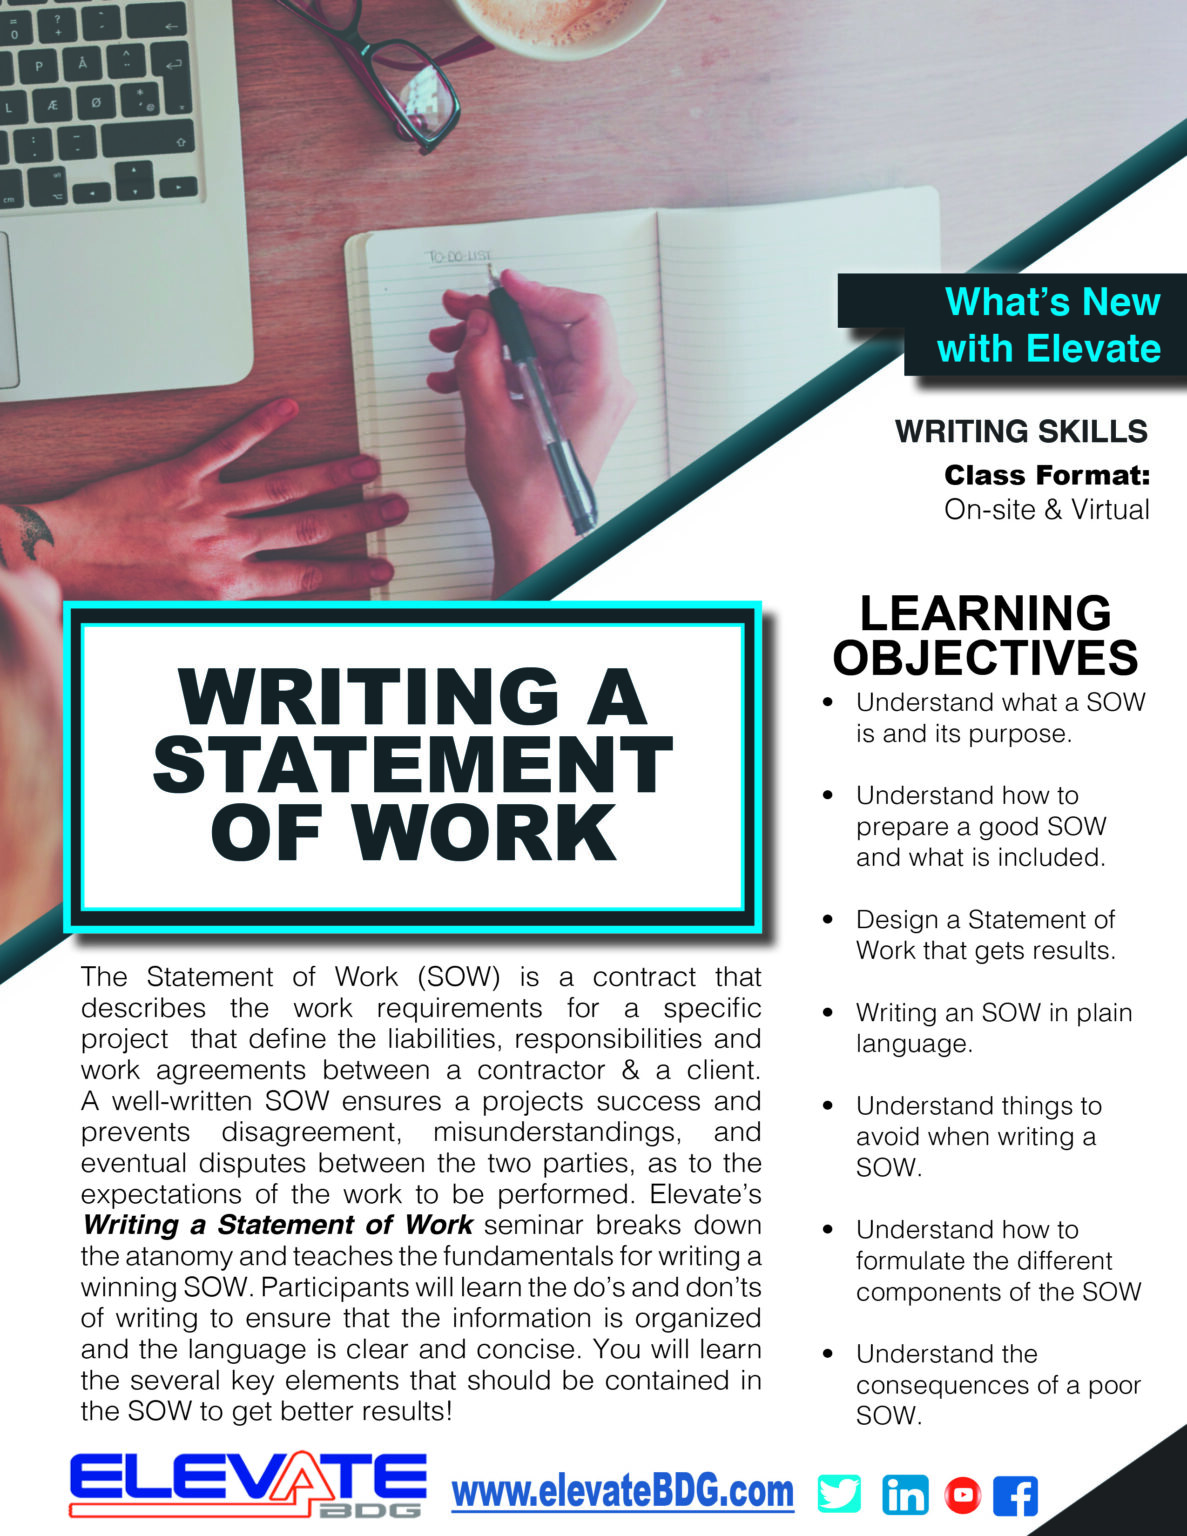 WRITING A STATEMENT OF WORK 1187x1536 1